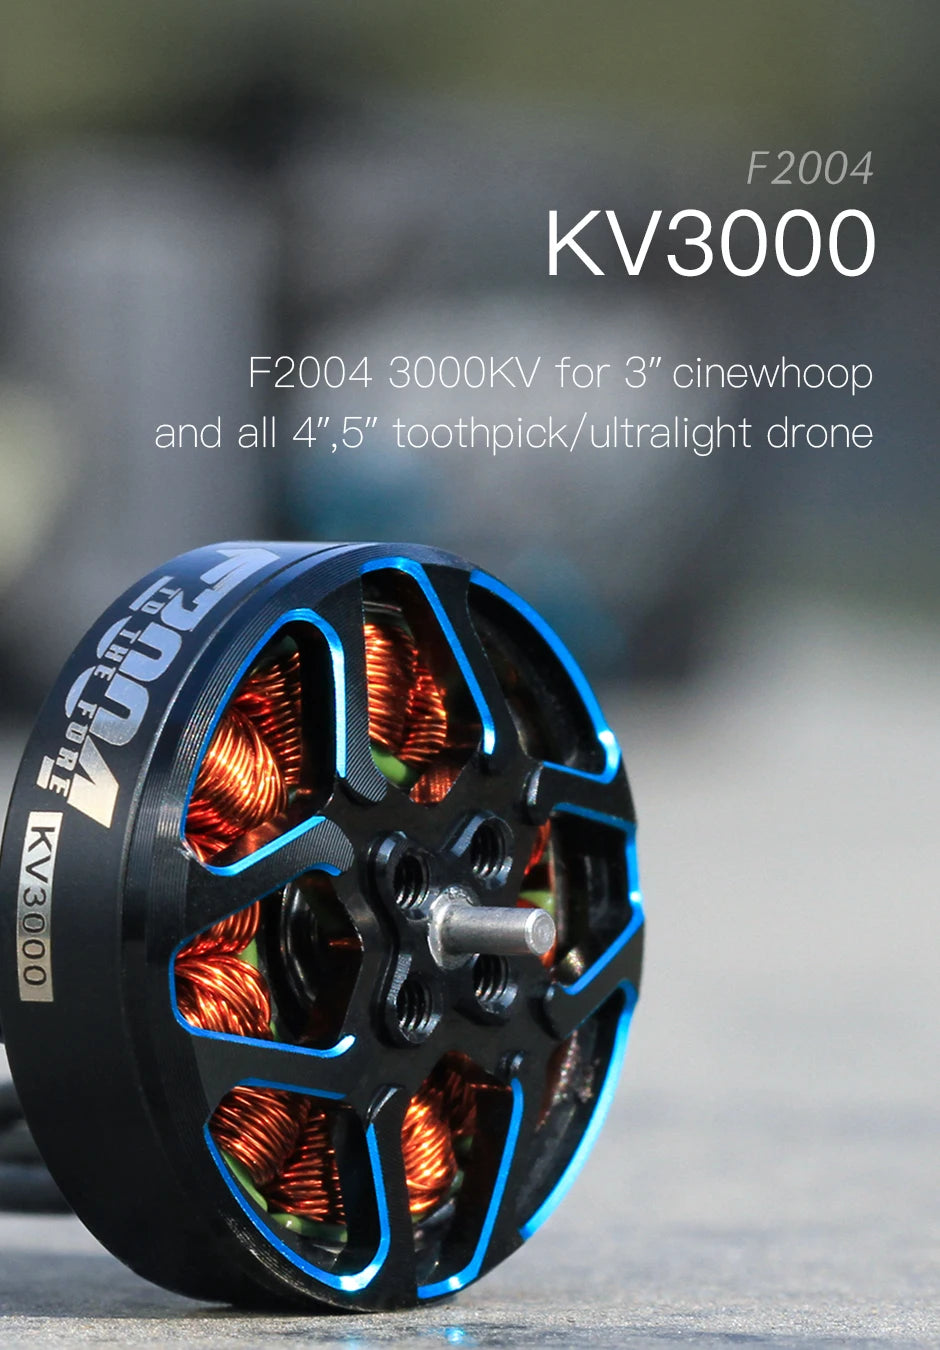 T-motor, F2004 3000kV for 3" cinewhoop and all 4",5"